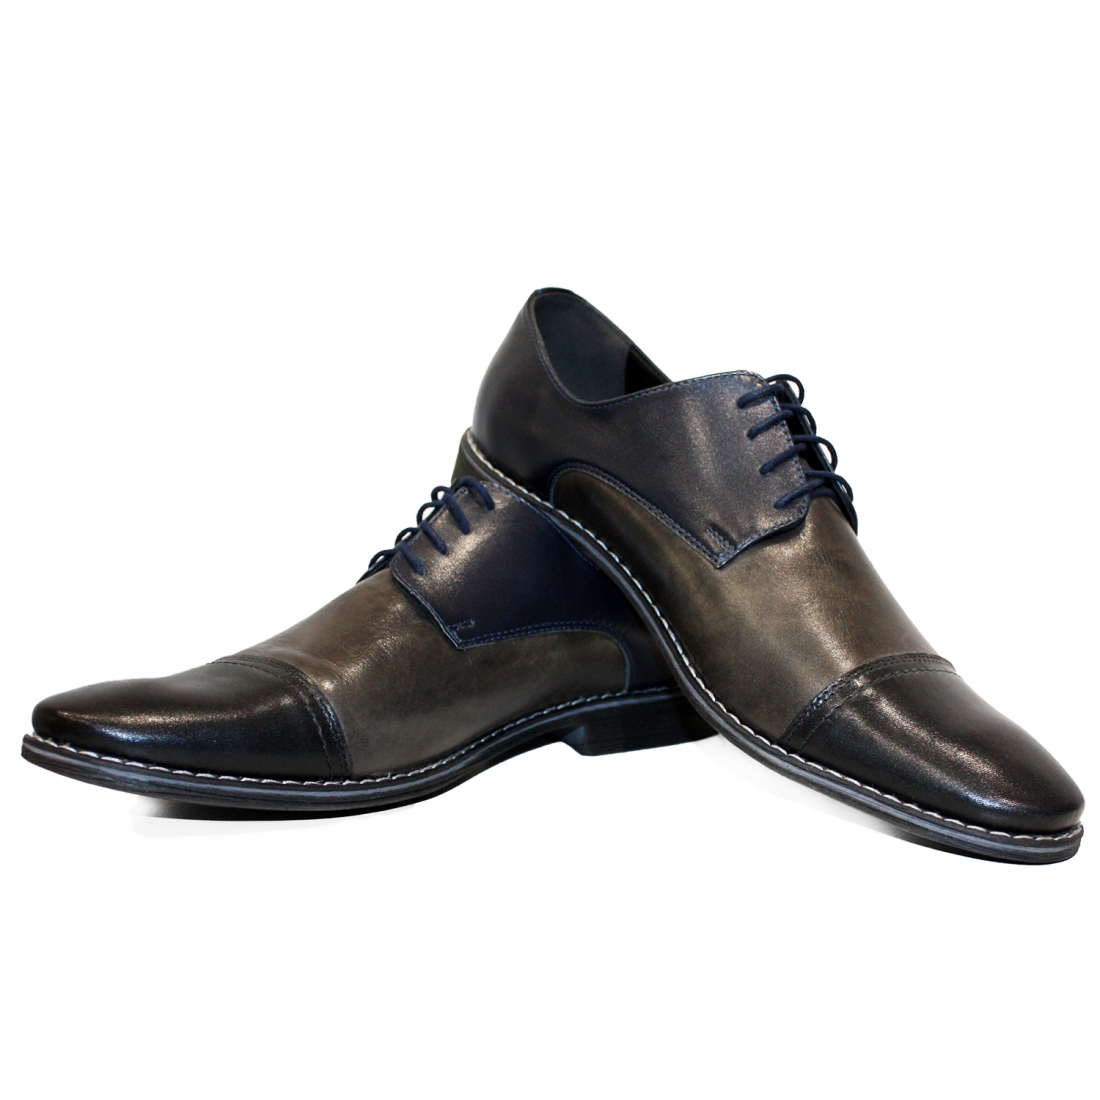 Modello Jeter - Chaussure Classique - Handmade Colorful Italian Leather Shoes